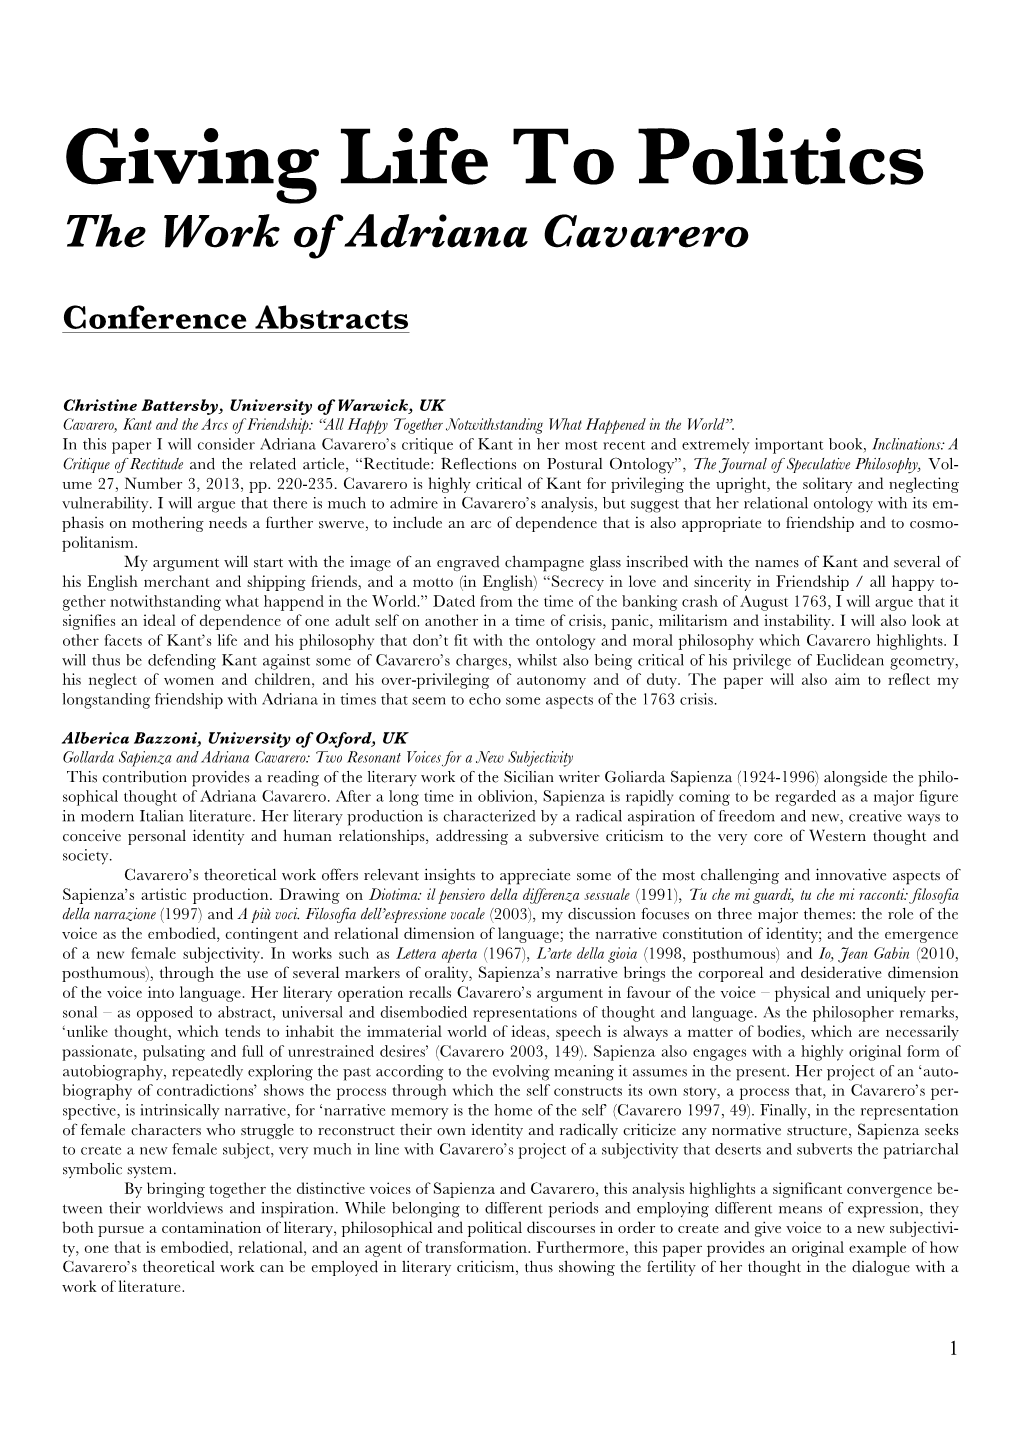 Giving Life to Politics the Work of Adriana Cavarero Conference Abstracts